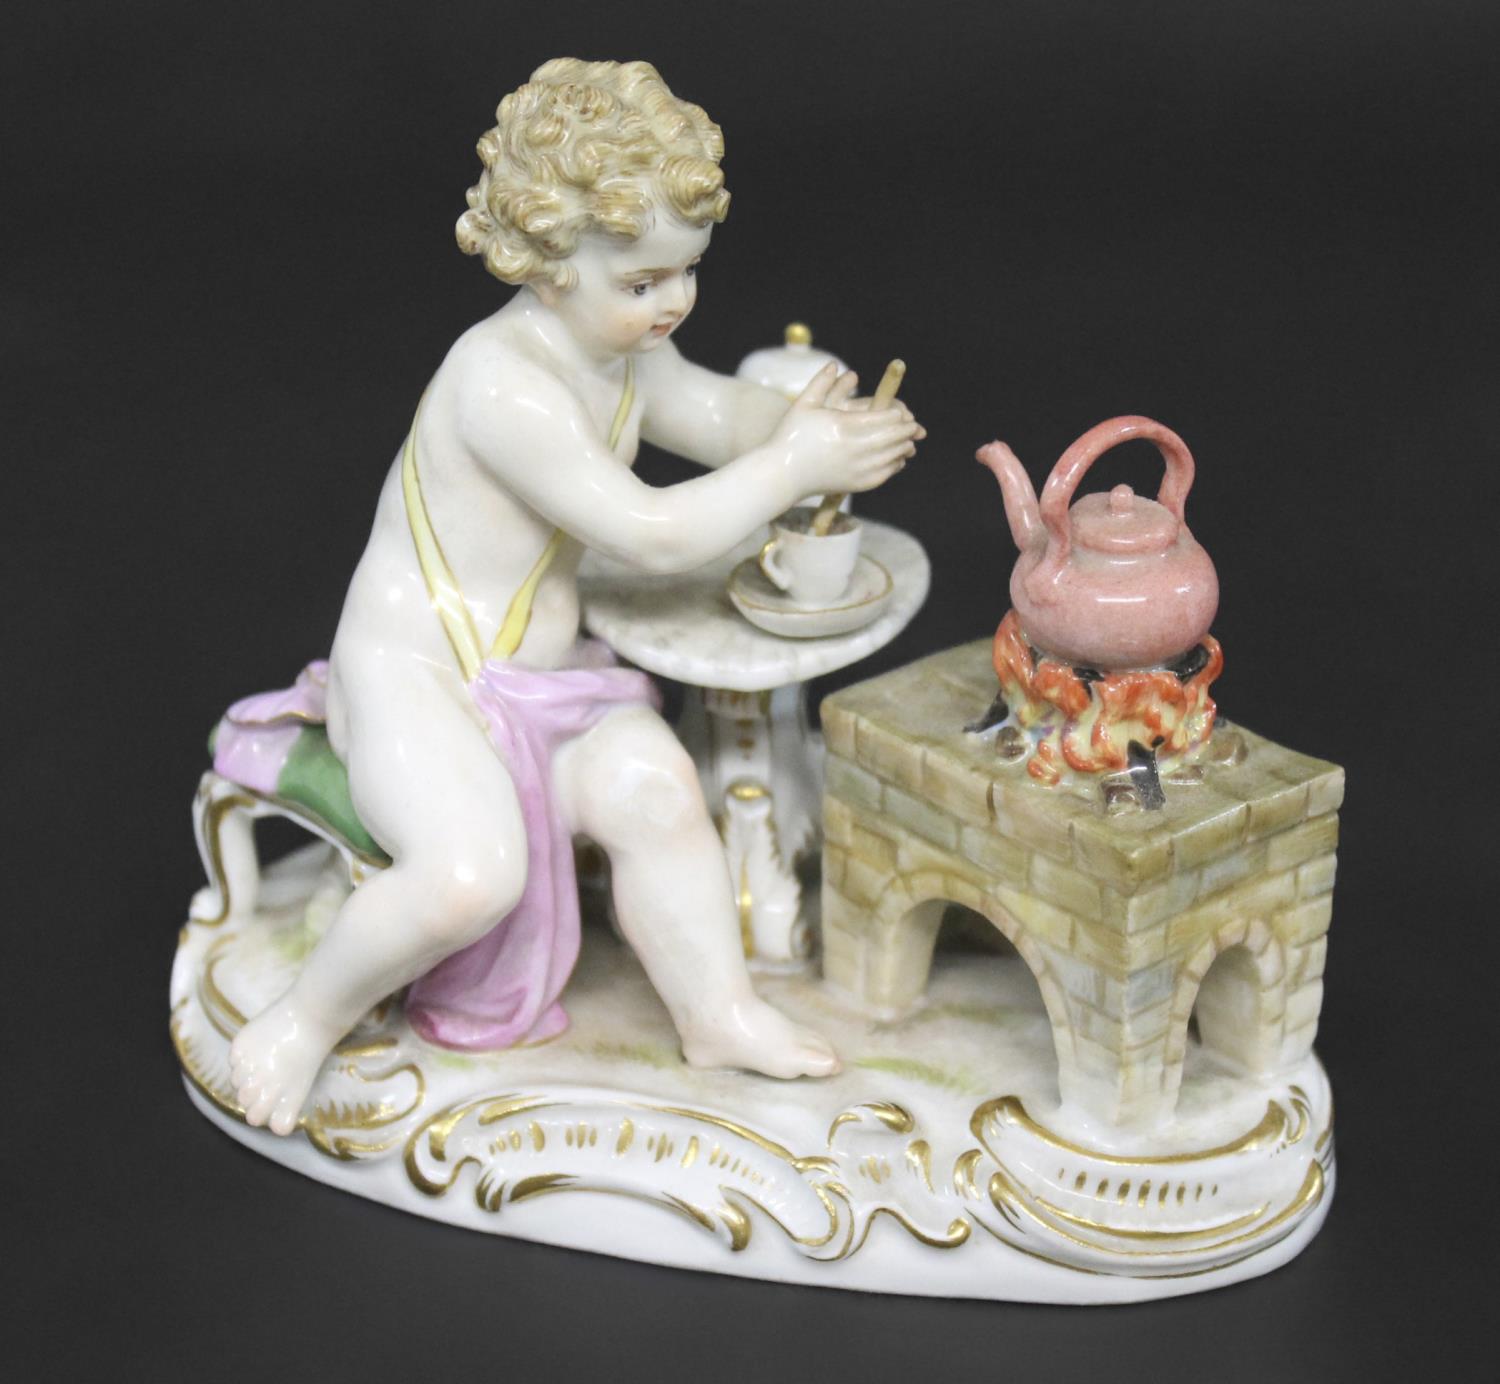 MEISSEN FIGURE a porcelain figure of a cherub mixing a drink, with a brazier and a kettle on a fire,